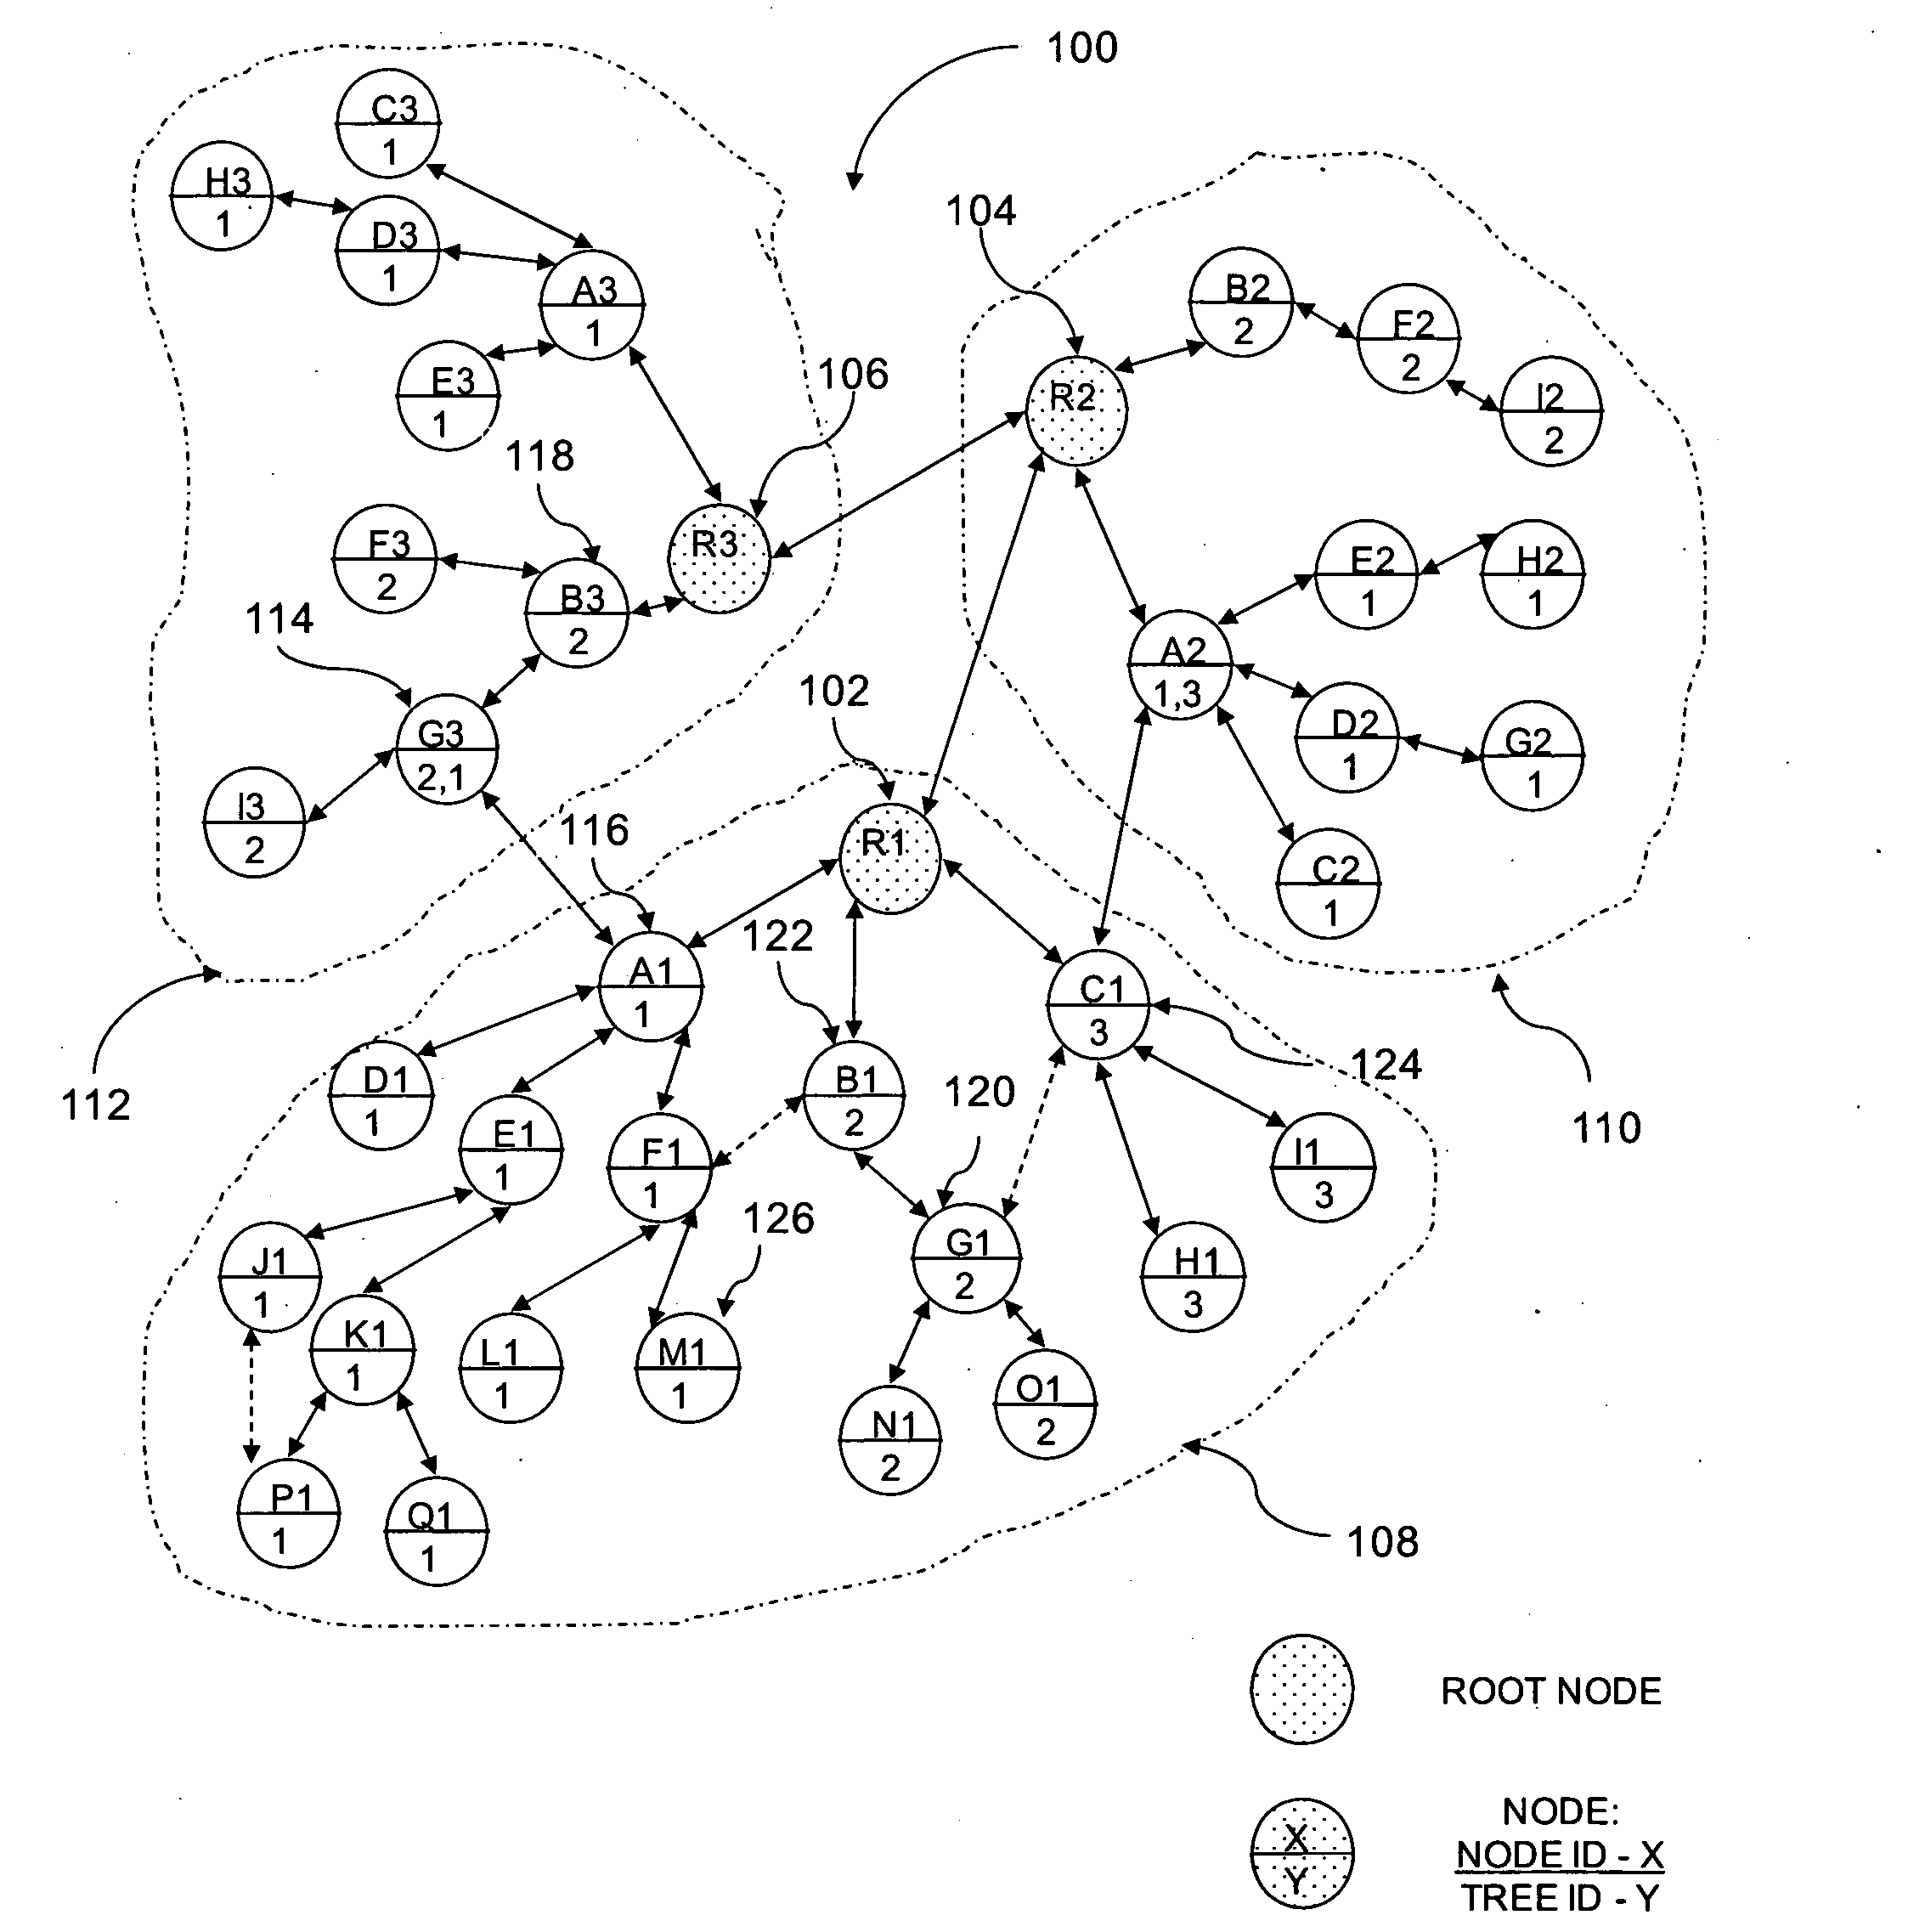 Method and system for increasing throughput in a hierarchical wireless network